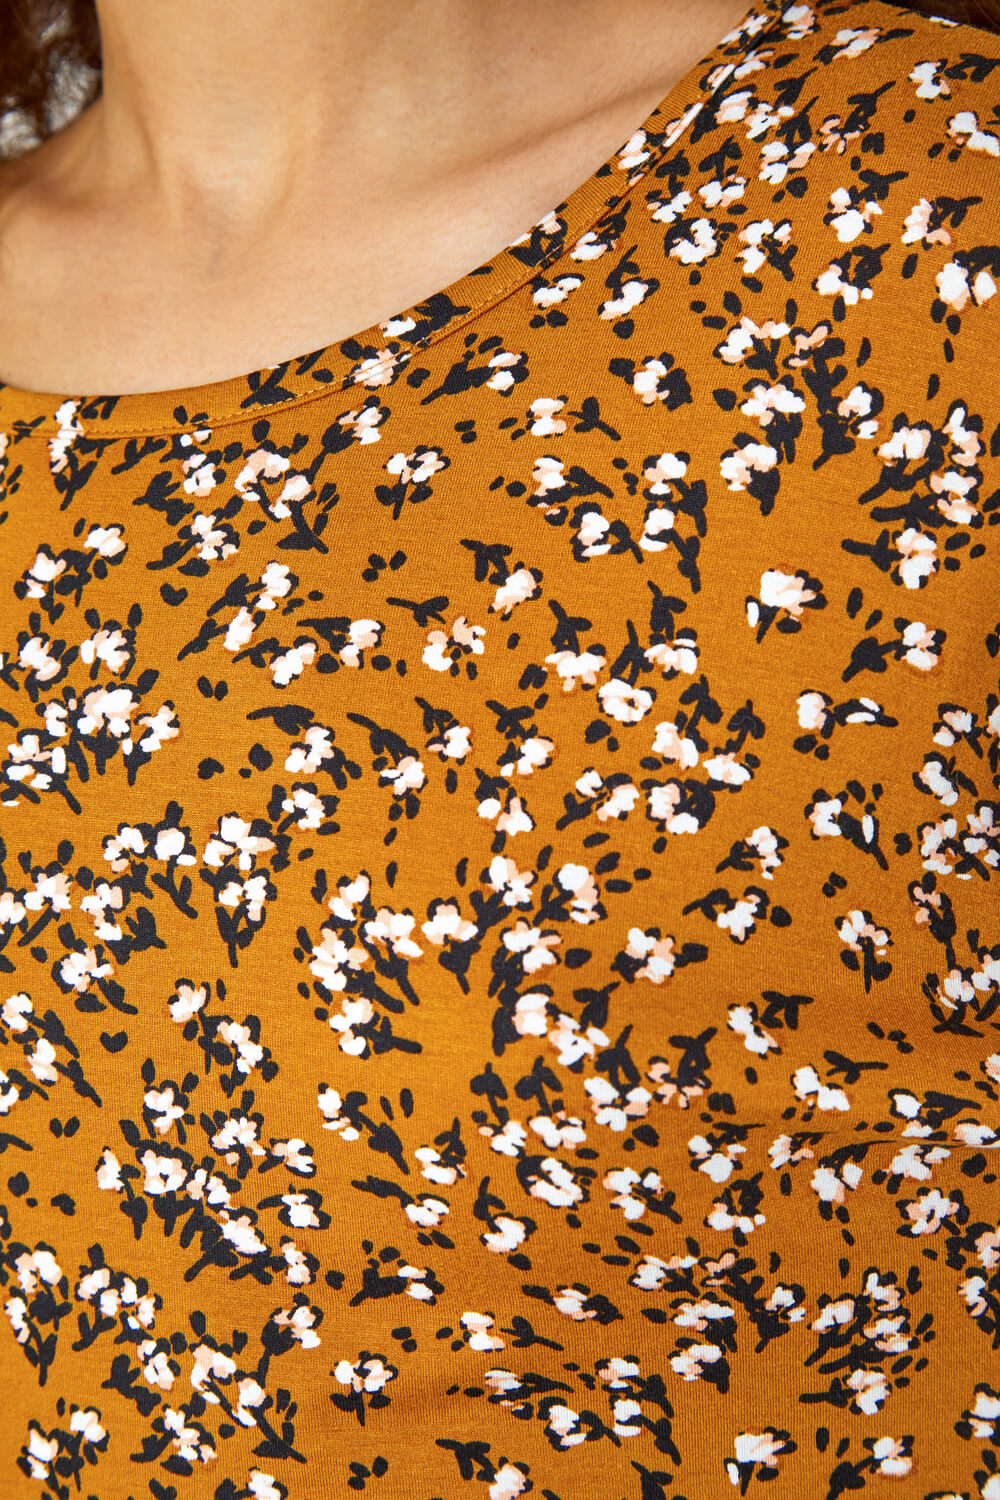 Ochre Ditsy Floral Stretch Blouson Top, Image 5 of 5